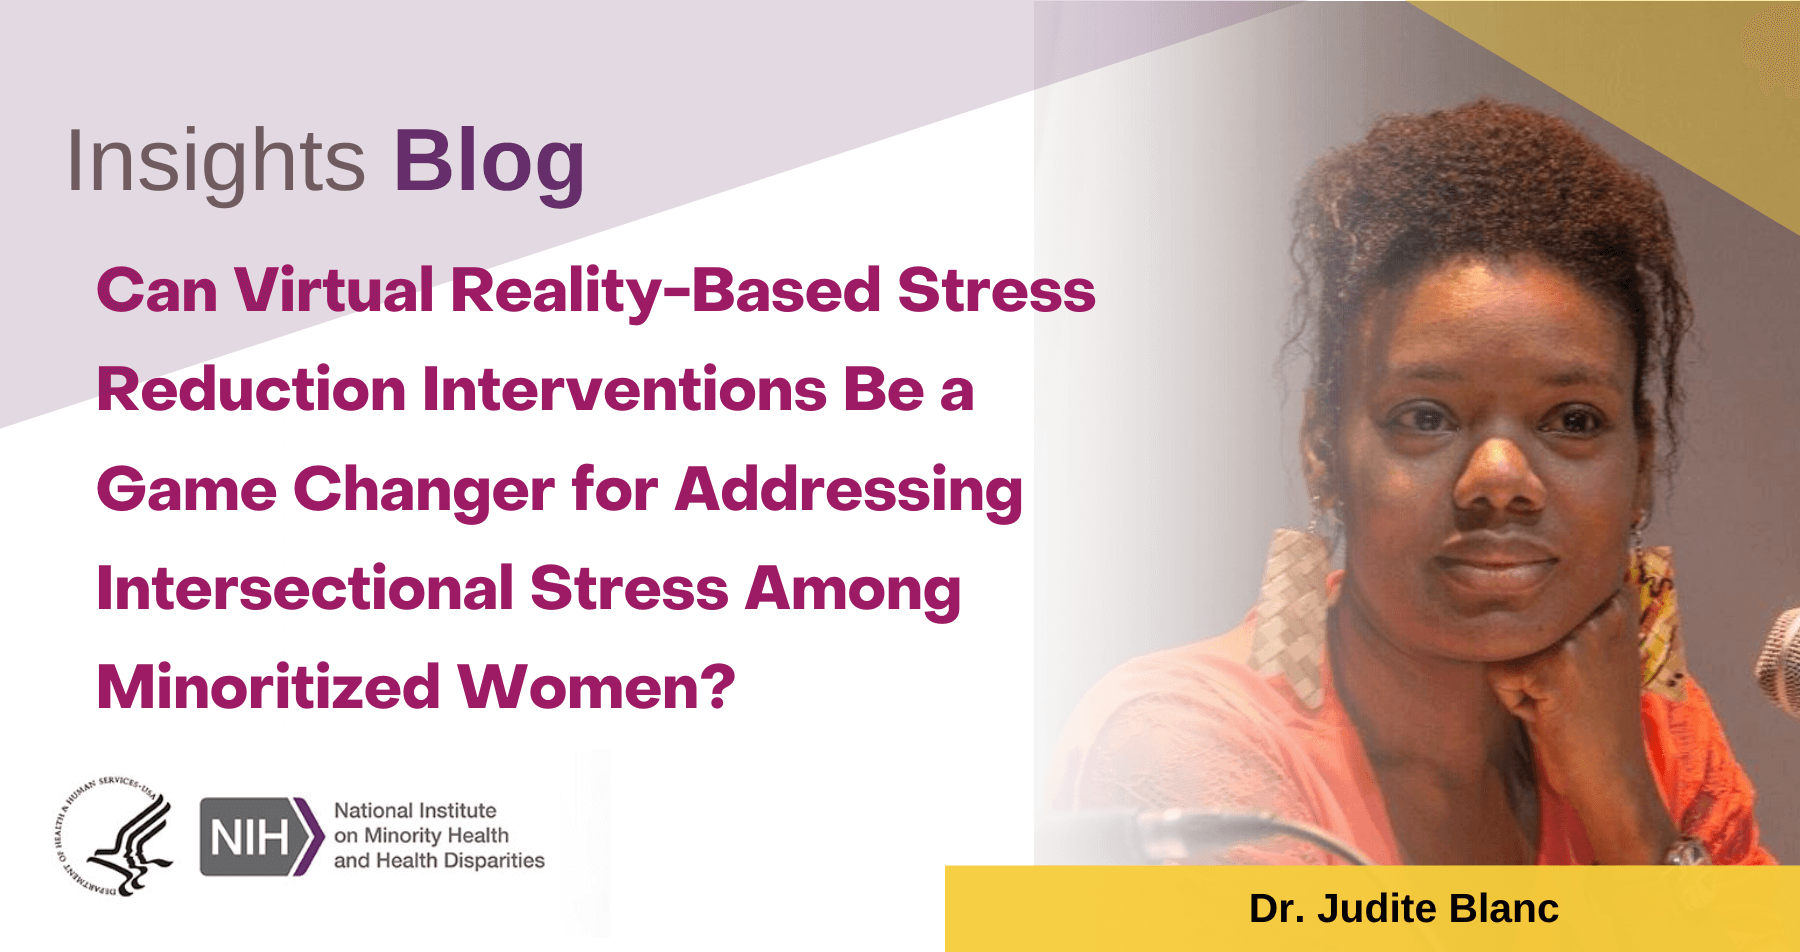 Insights Blog: Can Virtual Reality-Based Stress Reduction Interventions Be a Game Changer for Addressing Intersectional Stress Among Minoritized Women? Photo of author Dr. Judite Blanc